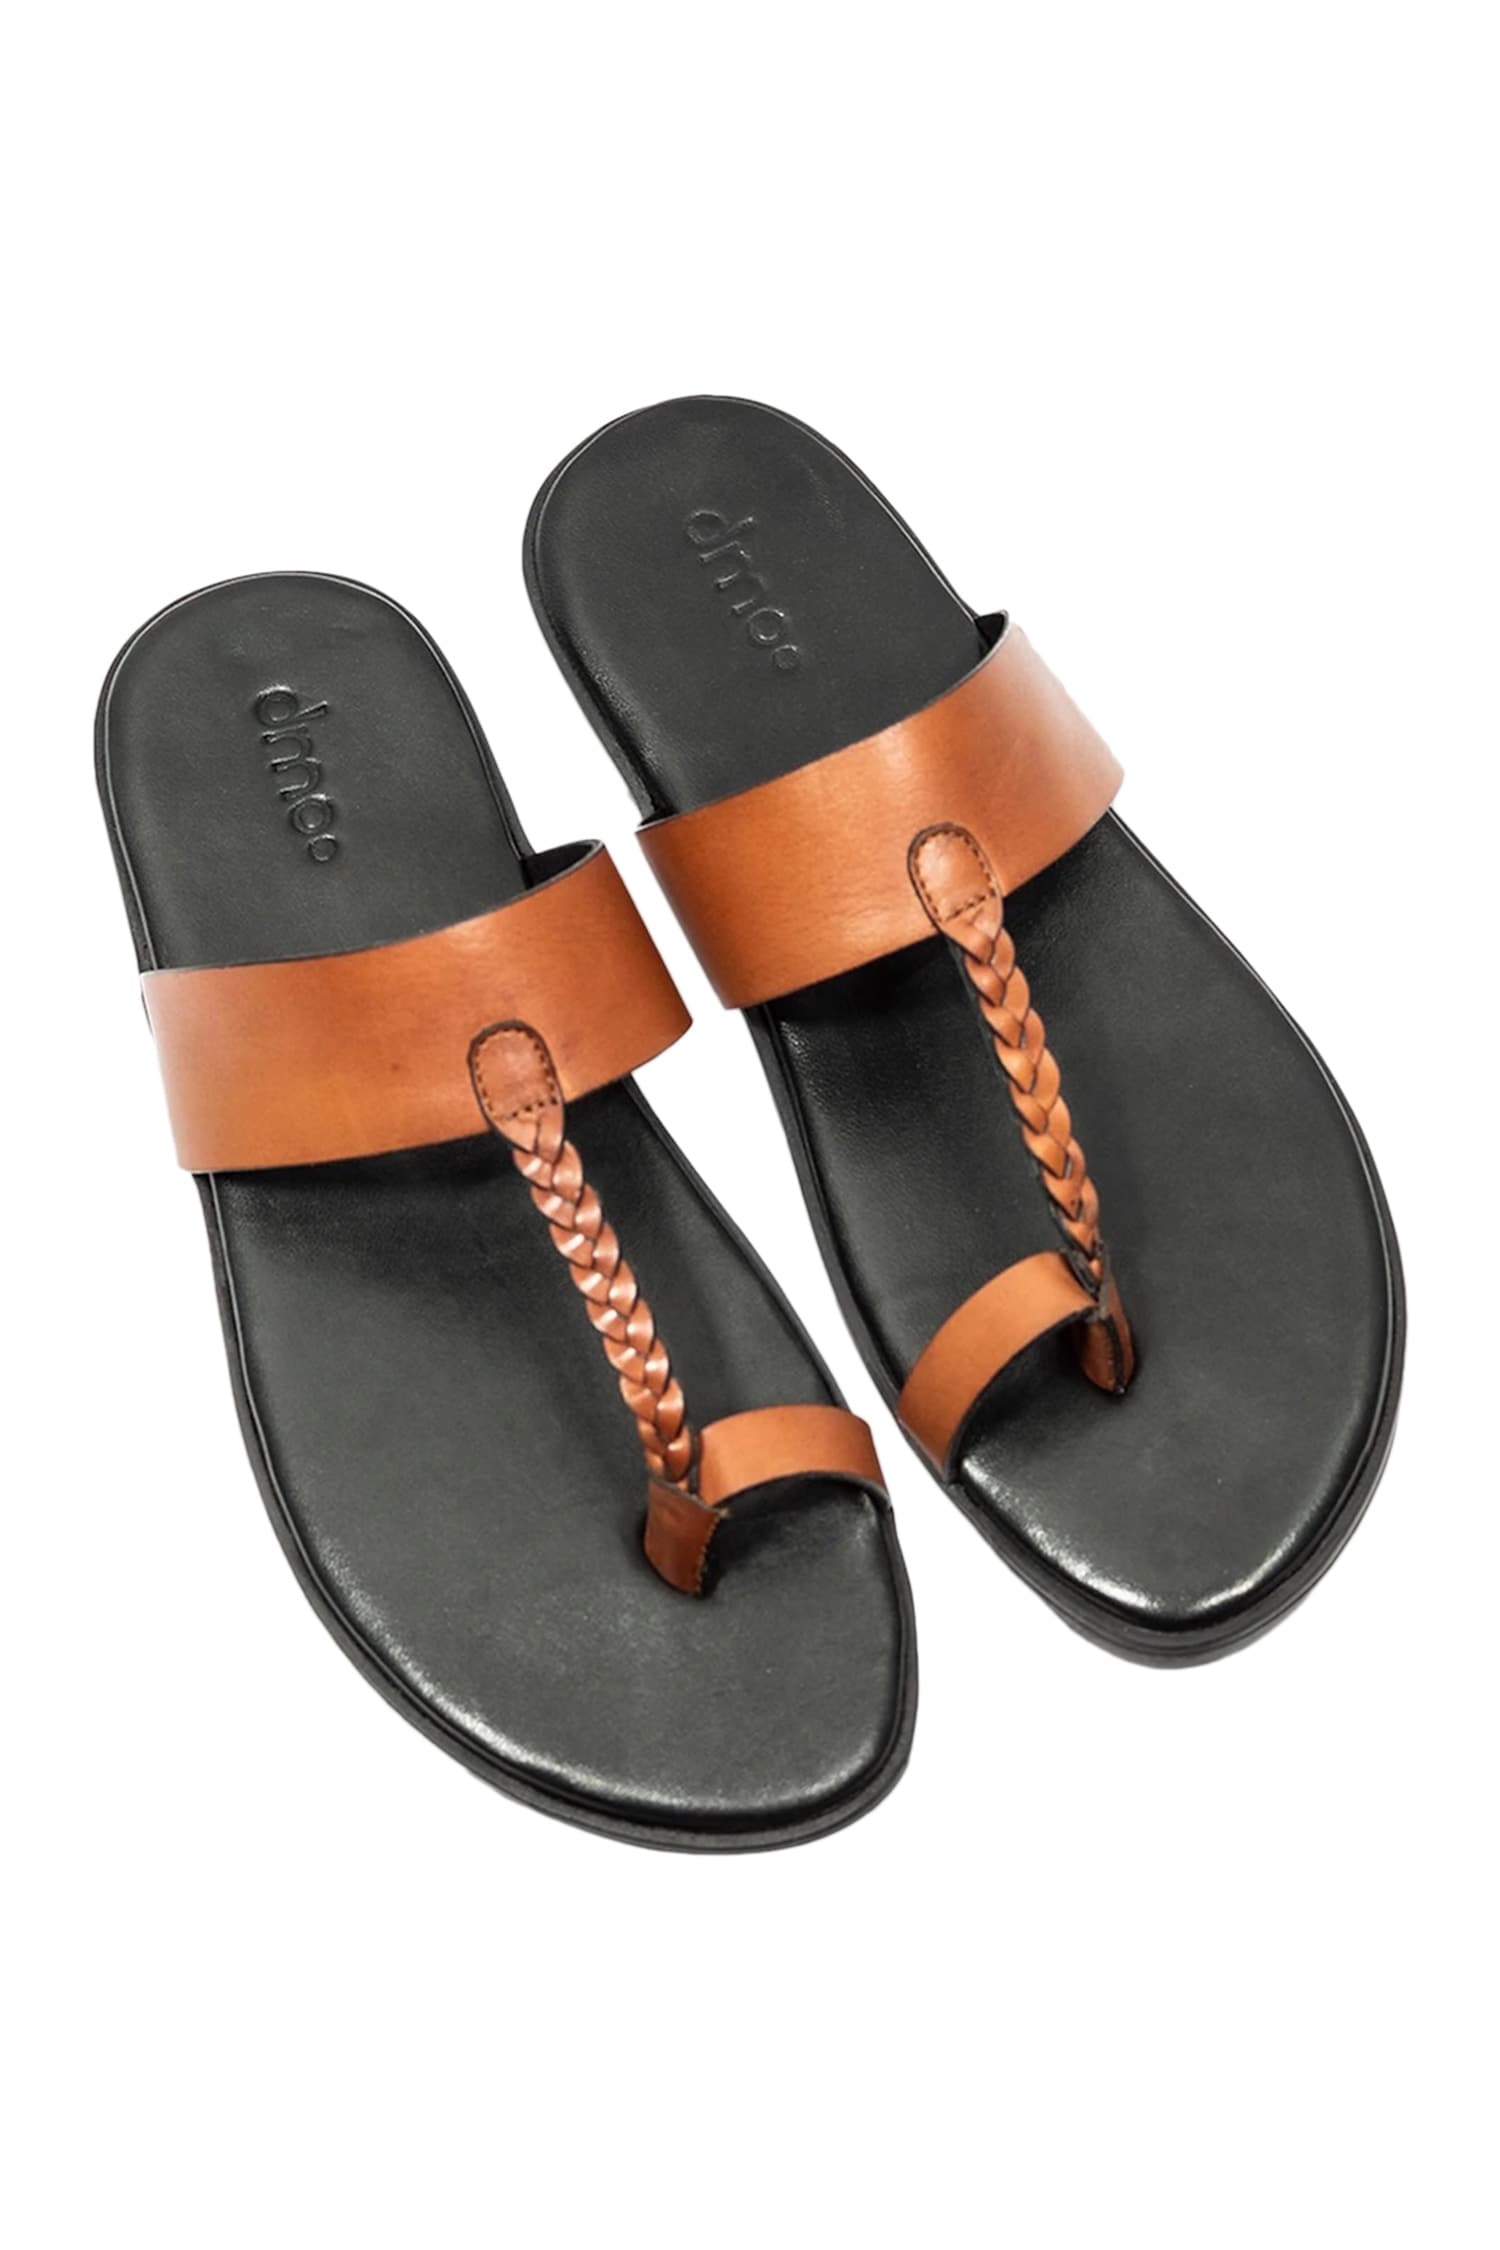 Dmodot Brown Leather Handmade Woven Strap Sandals